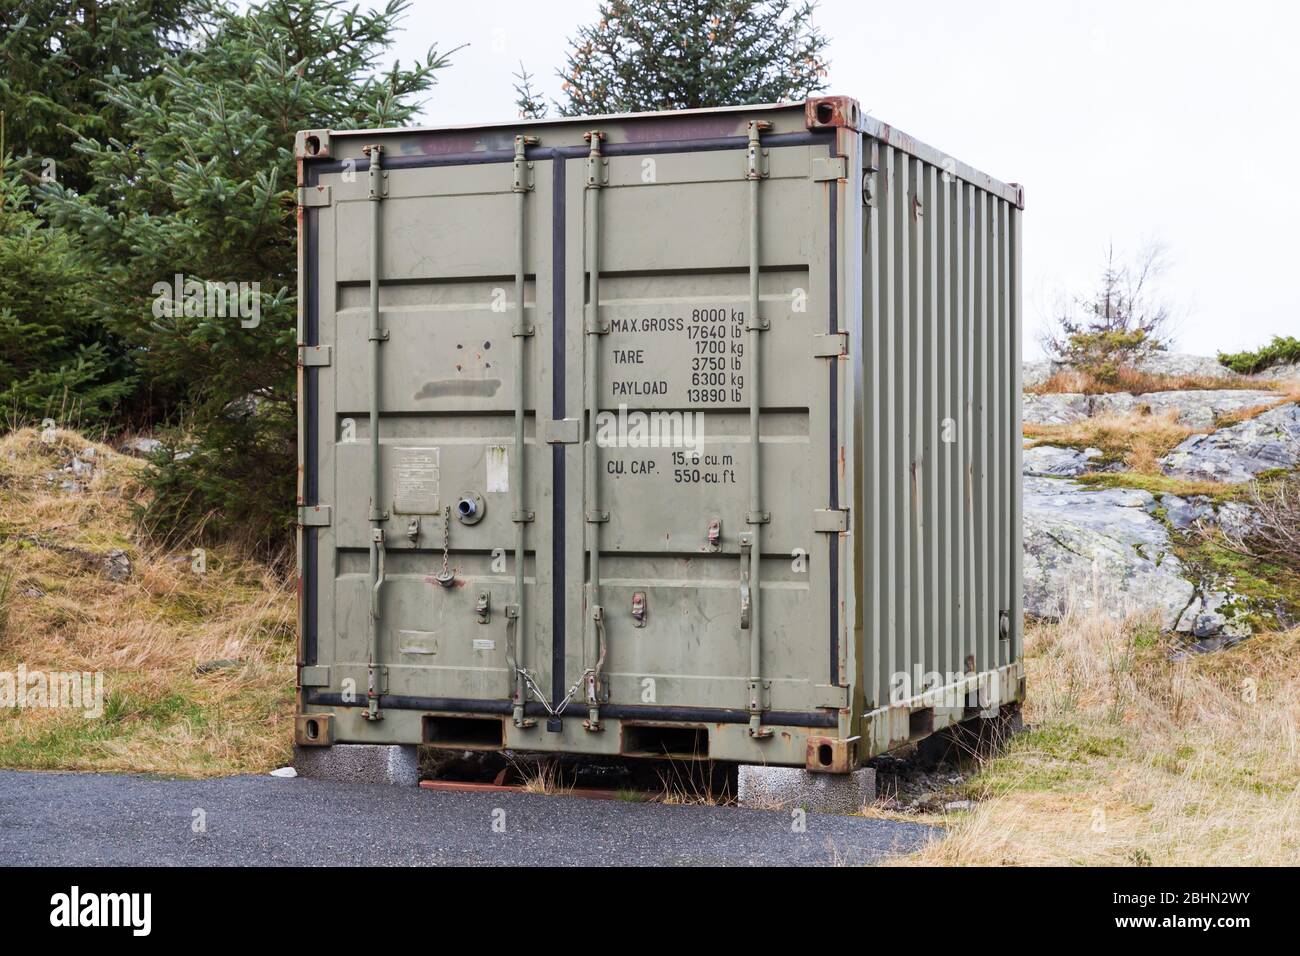 Military green cargo container stands on grass, industrial shipping equipment Stock Photo